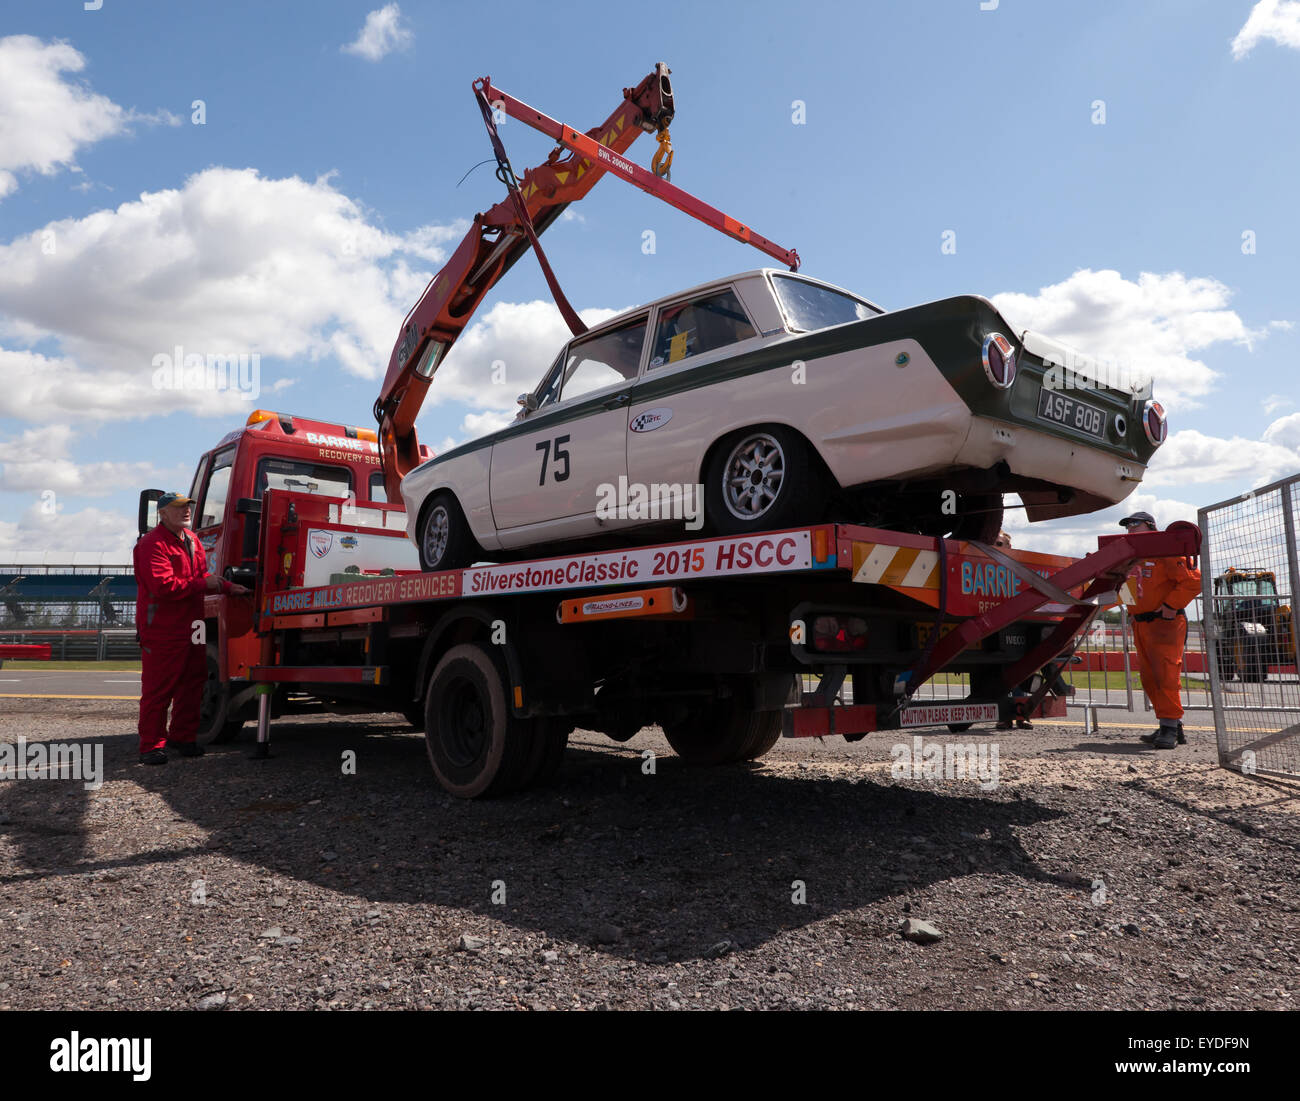 A 1965 Ford Lotus Cortina Mk1 with a collapsed rear suspension being recovered onto a flatbed truck, at the Silverstone Classic. Stock Photo